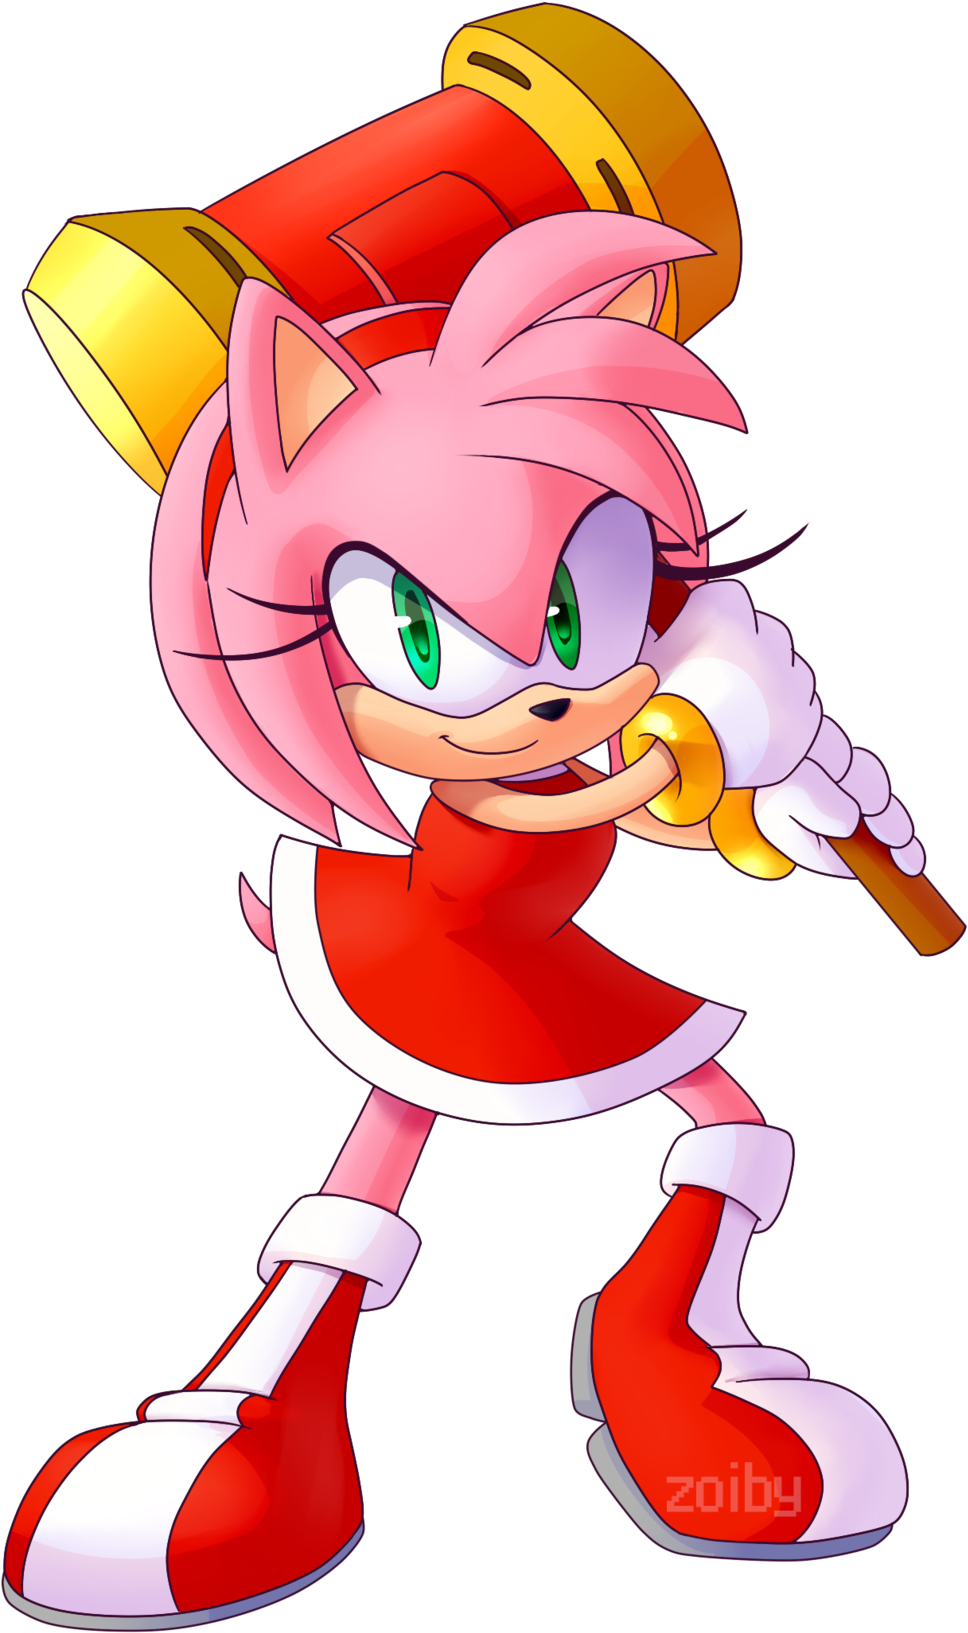 Amy Rose By Zoiby - Amy Rose (1024x1752)